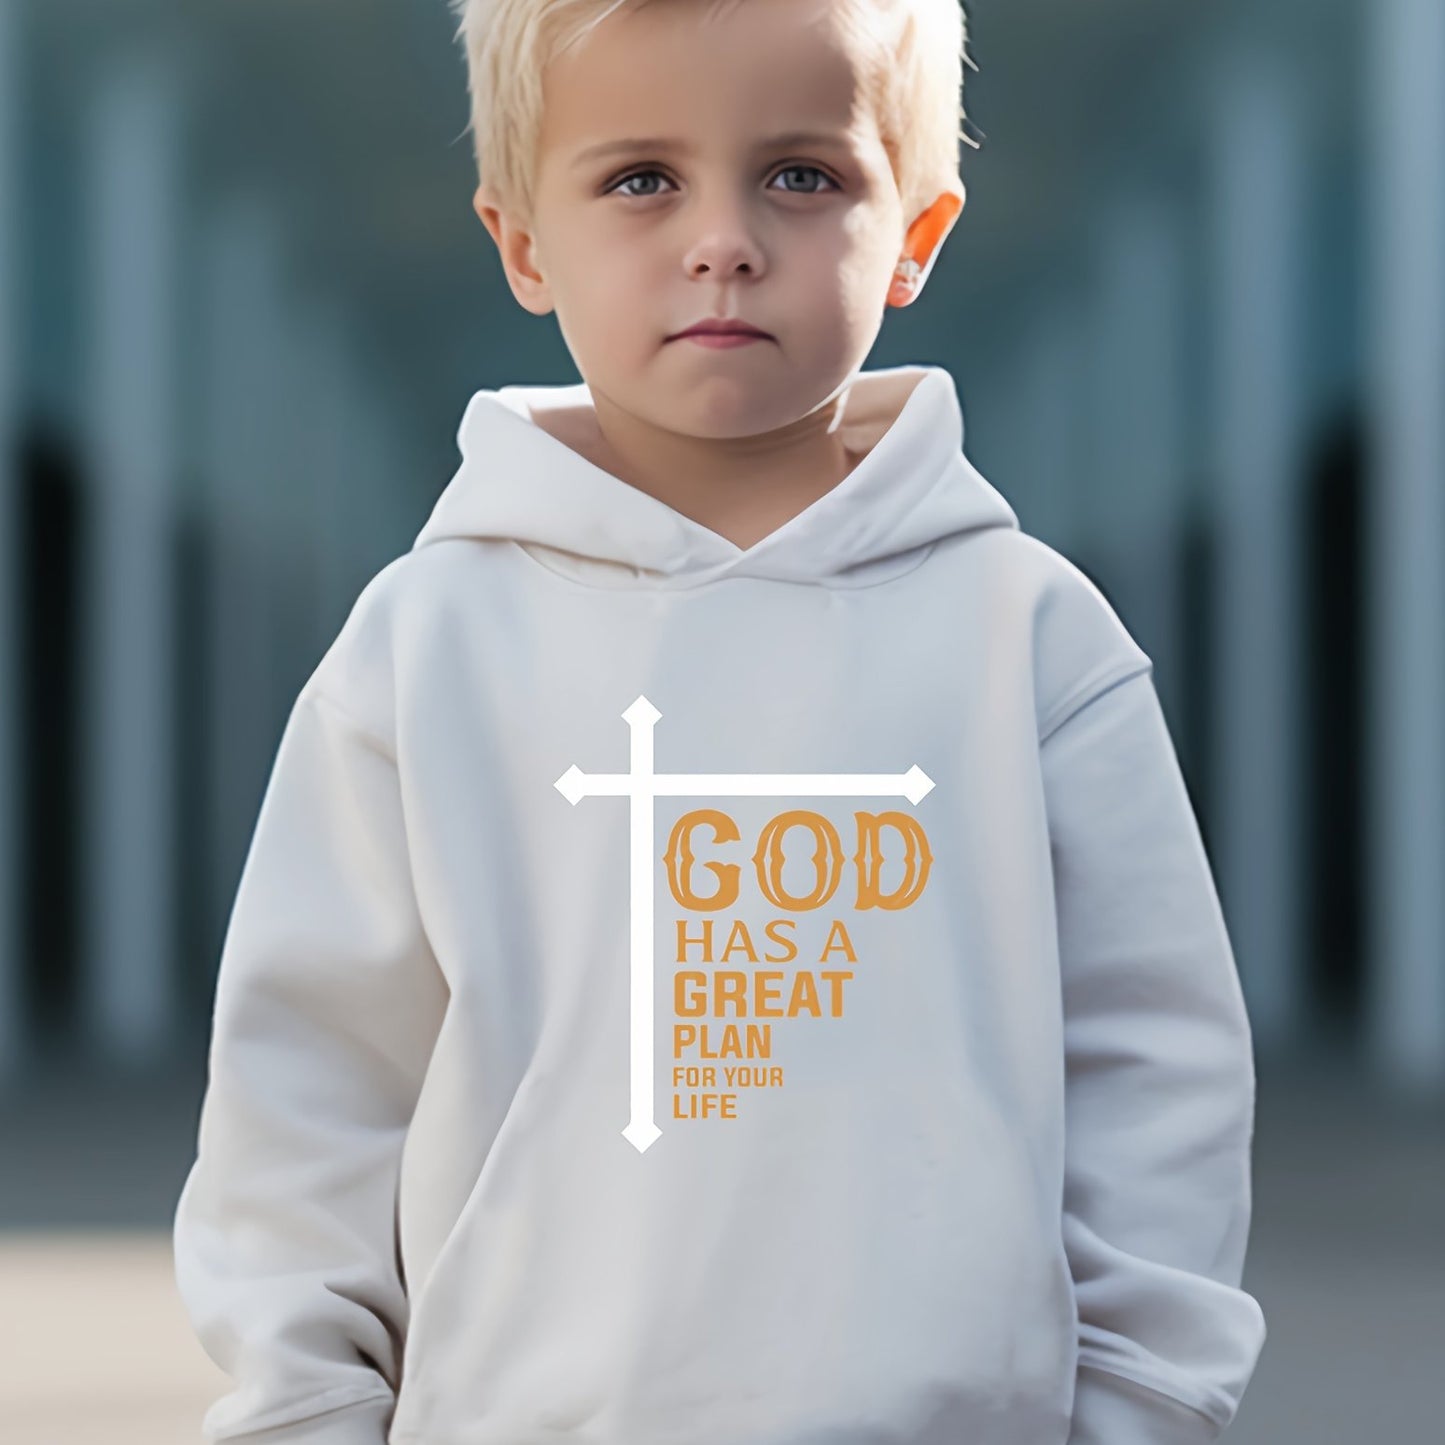 GOD HAS A GREAT PLAN FOR YOUR LIFE Toddler Christian Casual Outfit claimedbygoddesigns